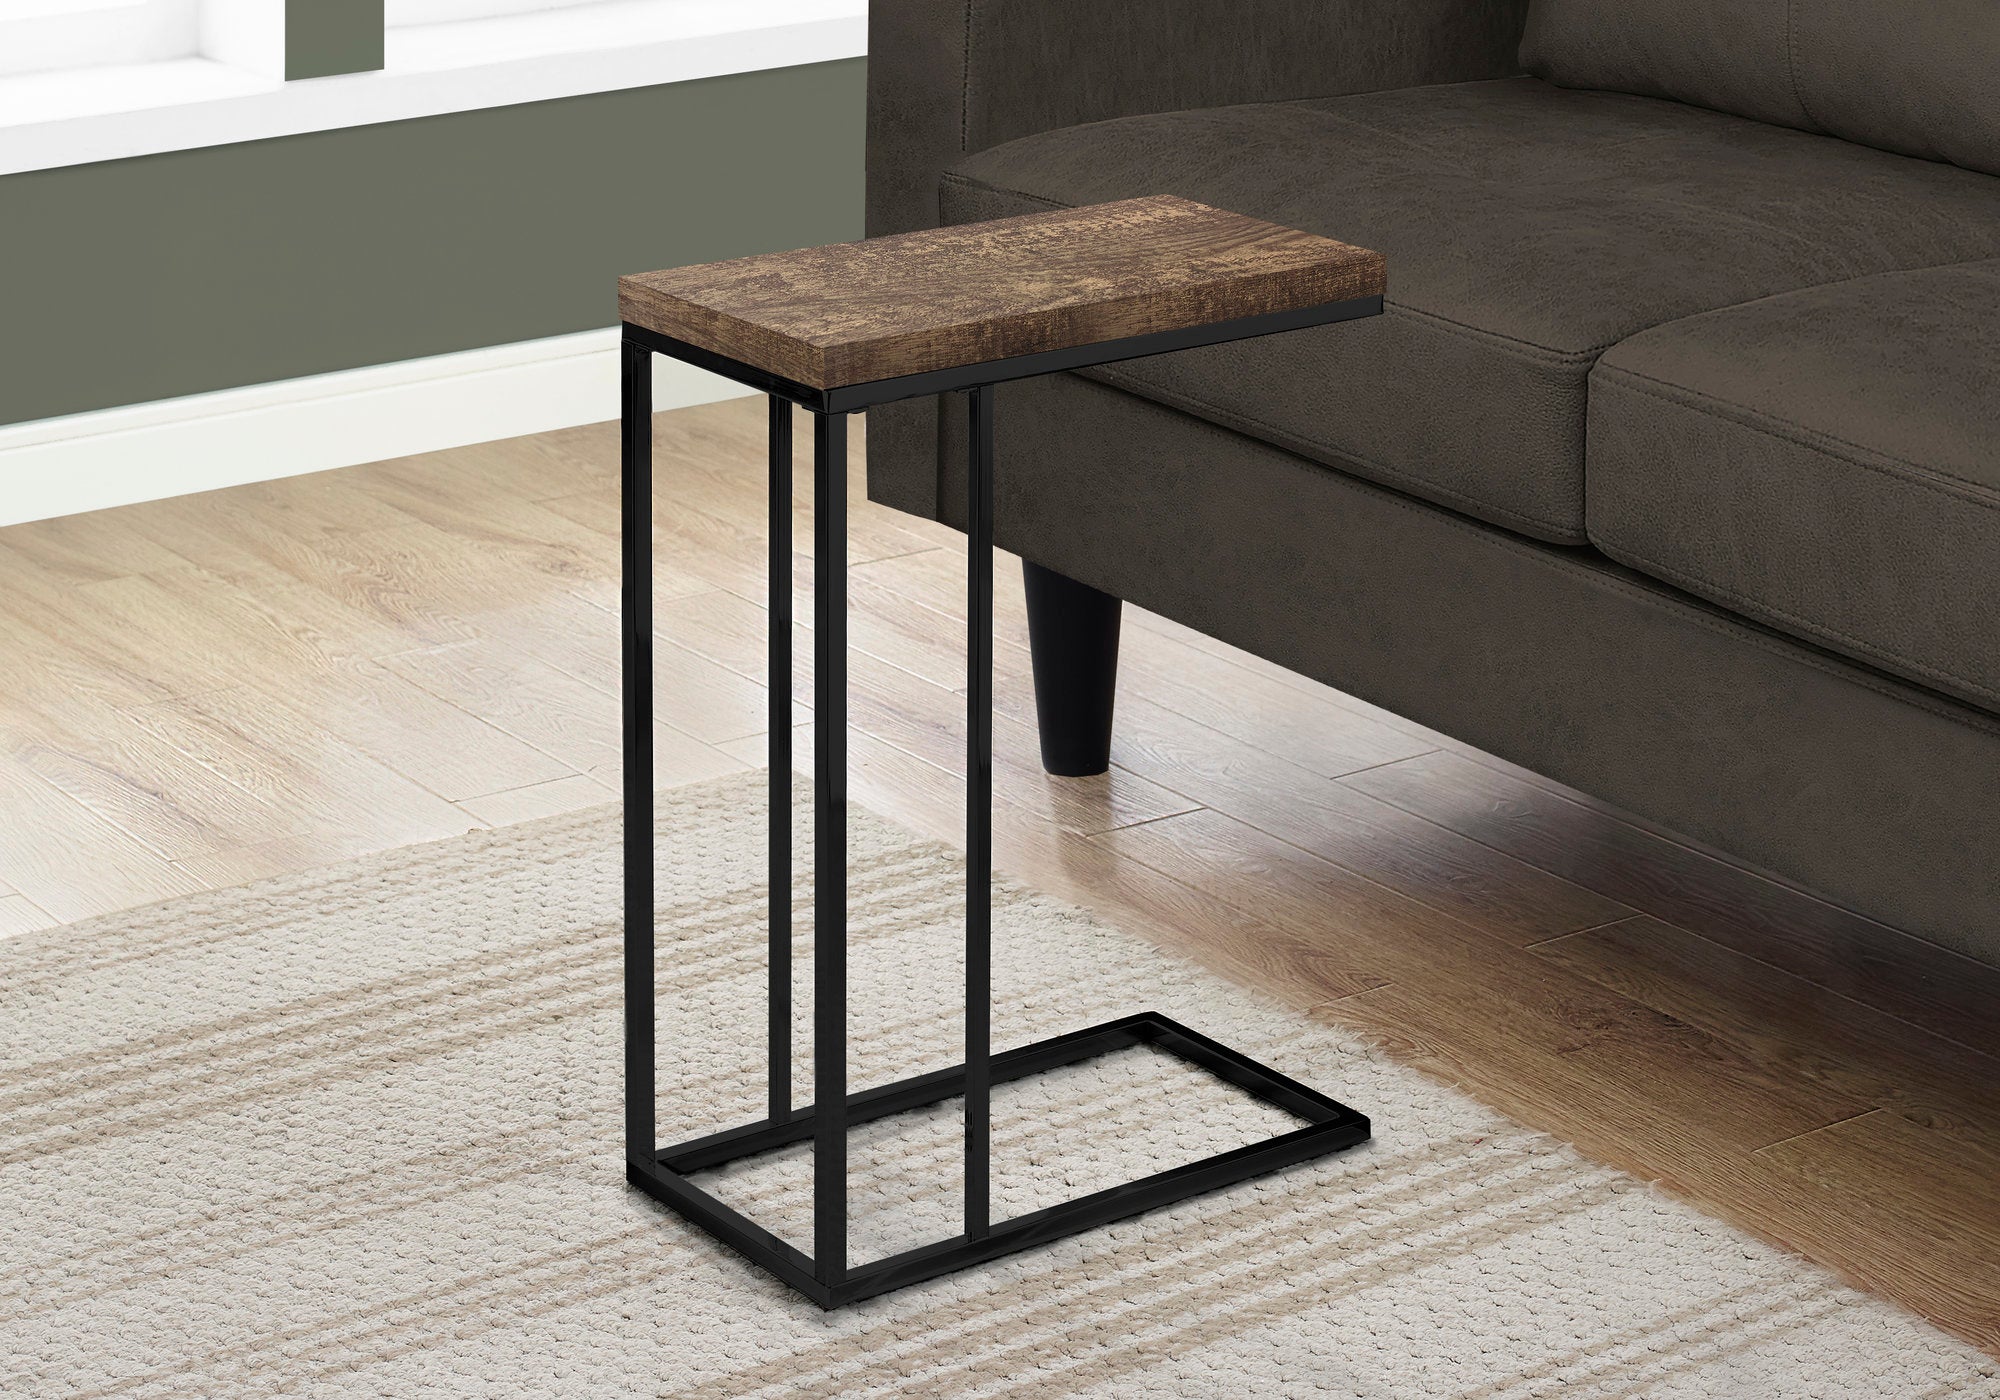 MN-463403    Accent Table, C-Shaped, End, Side, Snack, Living Room, Bedroom, Metal Legs, Laminate, Brown Reclaimed Wood Look, Black, Contemporary, Modern